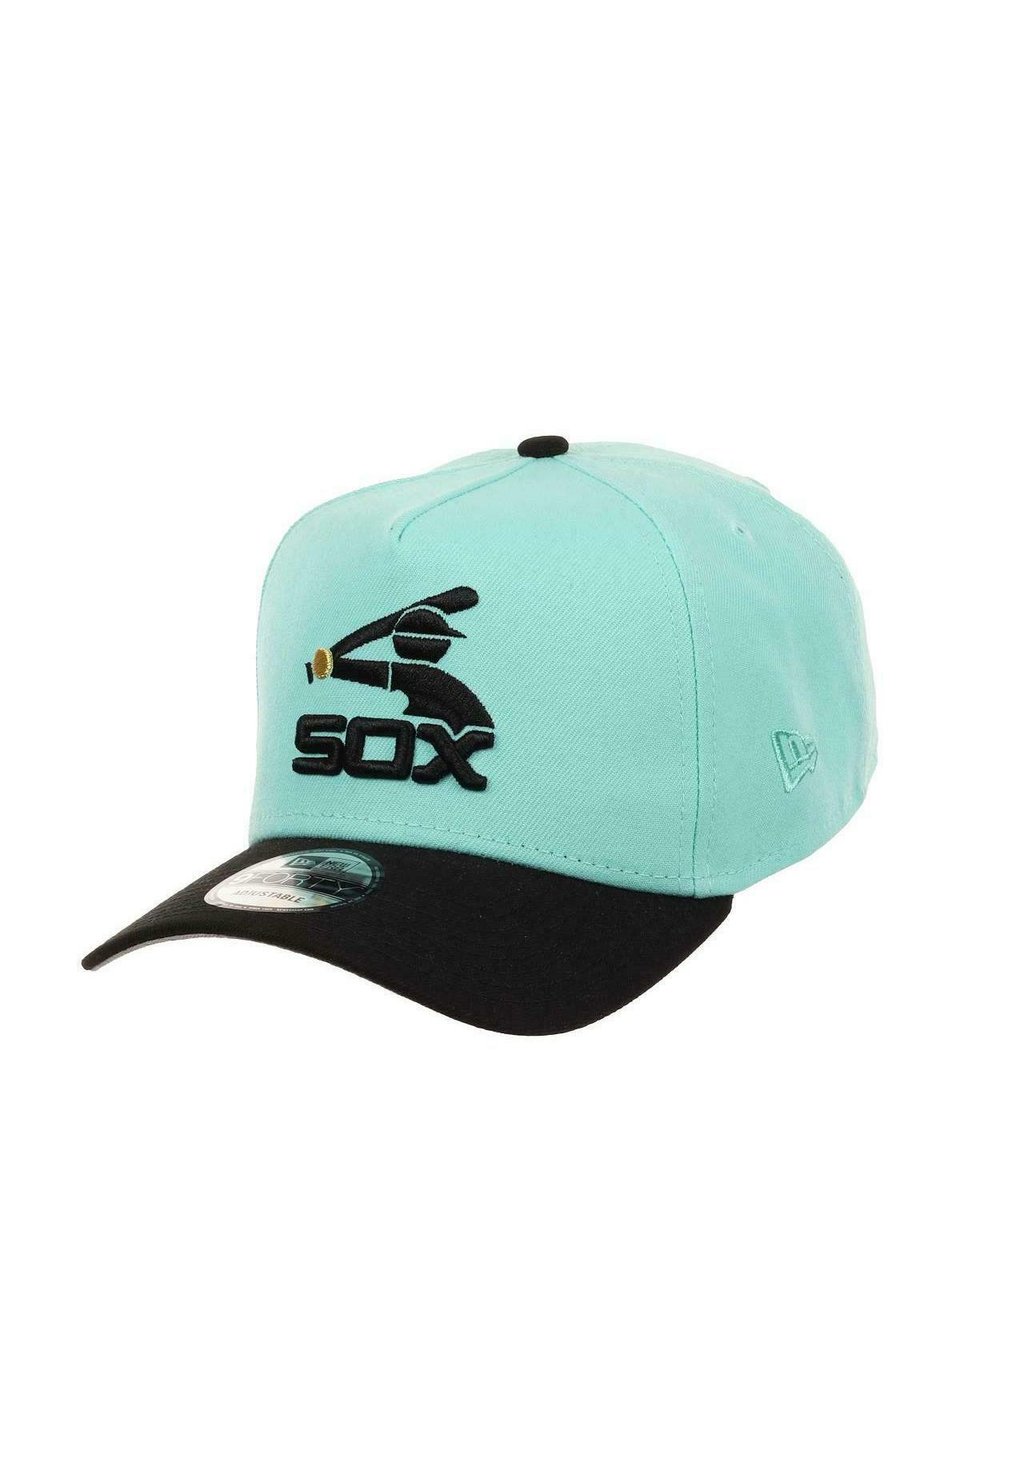 Бейсболка CHICAGO SOX MLB COMISKEY PARK SIDEPATCH COOPERSTOWNMINT BL New Era, цвет turquoise